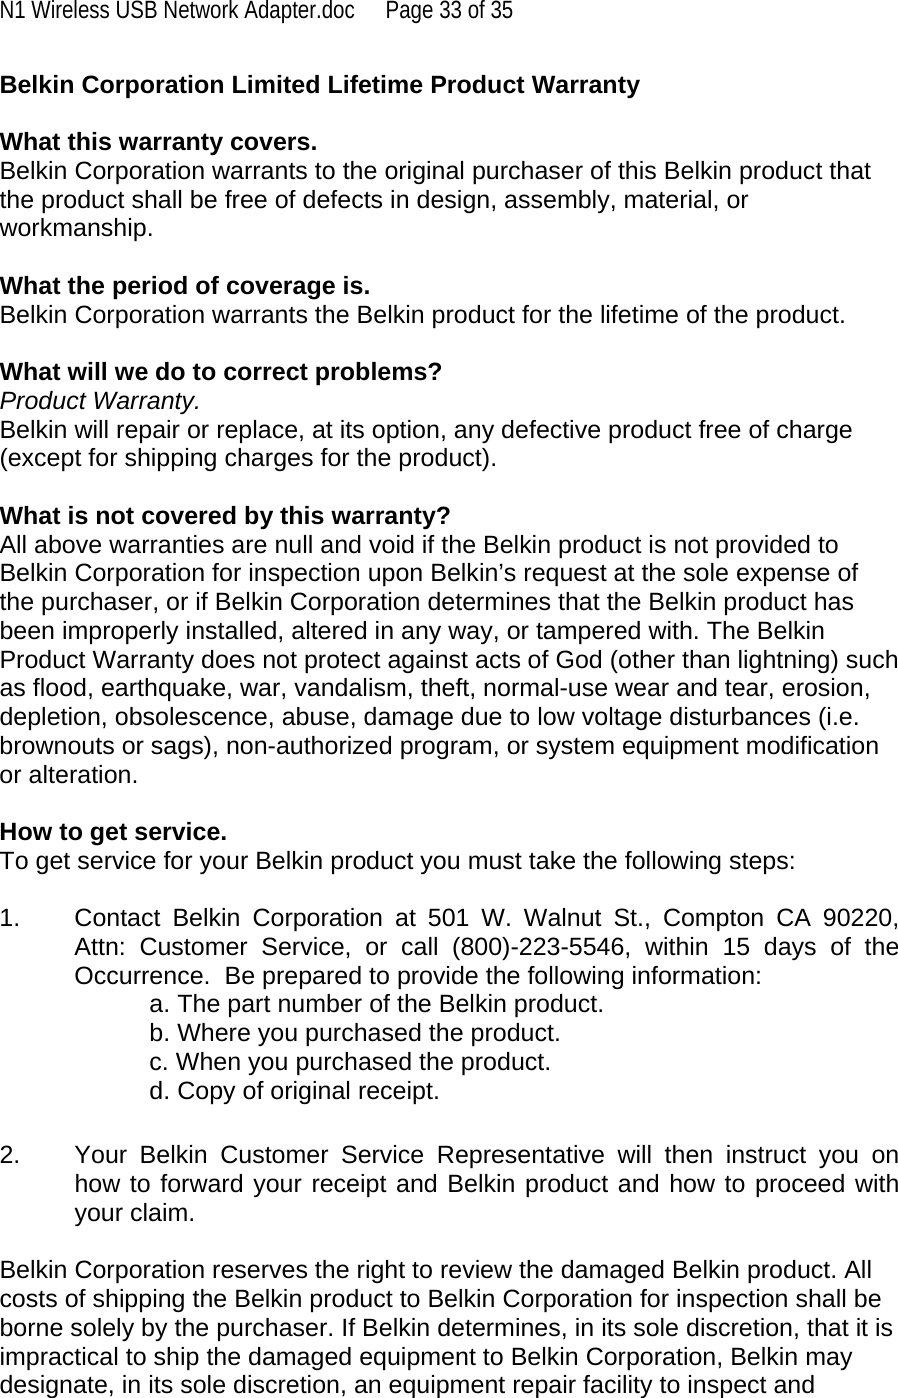 N1 Wireless USB Network Adapter.doc  Page 33 of 35 Belkin Corporation Limited Lifetime Product Warranty  What this warranty covers. Belkin Corporation warrants to the original purchaser of this Belkin product that the product shall be free of defects in design, assembly, material, or workmanship.   What the period of coverage is. Belkin Corporation warrants the Belkin product for the lifetime of the product.  What will we do to correct problems?  Product Warranty. Belkin will repair or replace, at its option, any defective product free of charge (except for shipping charges for the product).    What is not covered by this warranty? All above warranties are null and void if the Belkin product is not provided to Belkin Corporation for inspection upon Belkin’s request at the sole expense of the purchaser, or if Belkin Corporation determines that the Belkin product has been improperly installed, altered in any way, or tampered with. The Belkin Product Warranty does not protect against acts of God (other than lightning) such as flood, earthquake, war, vandalism, theft, normal-use wear and tear, erosion, depletion, obsolescence, abuse, damage due to low voltage disturbances (i.e. brownouts or sags), non-authorized program, or system equipment modification or alteration.  How to get service.    To get service for your Belkin product you must take the following steps:  1.  Contact Belkin Corporation at 501 W. Walnut St., Compton CA 90220, Attn: Customer Service, or call (800)-223-5546, within 15 days of the Occurrence.  Be prepared to provide the following information: a. The part number of the Belkin product. b. Where you purchased the product. c. When you purchased the product. d. Copy of original receipt.  2.  Your Belkin Customer Service Representative will then instruct you on how to forward your receipt and Belkin product and how to proceed with your claim.  Belkin Corporation reserves the right to review the damaged Belkin product. All costs of shipping the Belkin product to Belkin Corporation for inspection shall be borne solely by the purchaser. If Belkin determines, in its sole discretion, that it is impractical to ship the damaged equipment to Belkin Corporation, Belkin may designate, in its sole discretion, an equipment repair facility to inspect and 